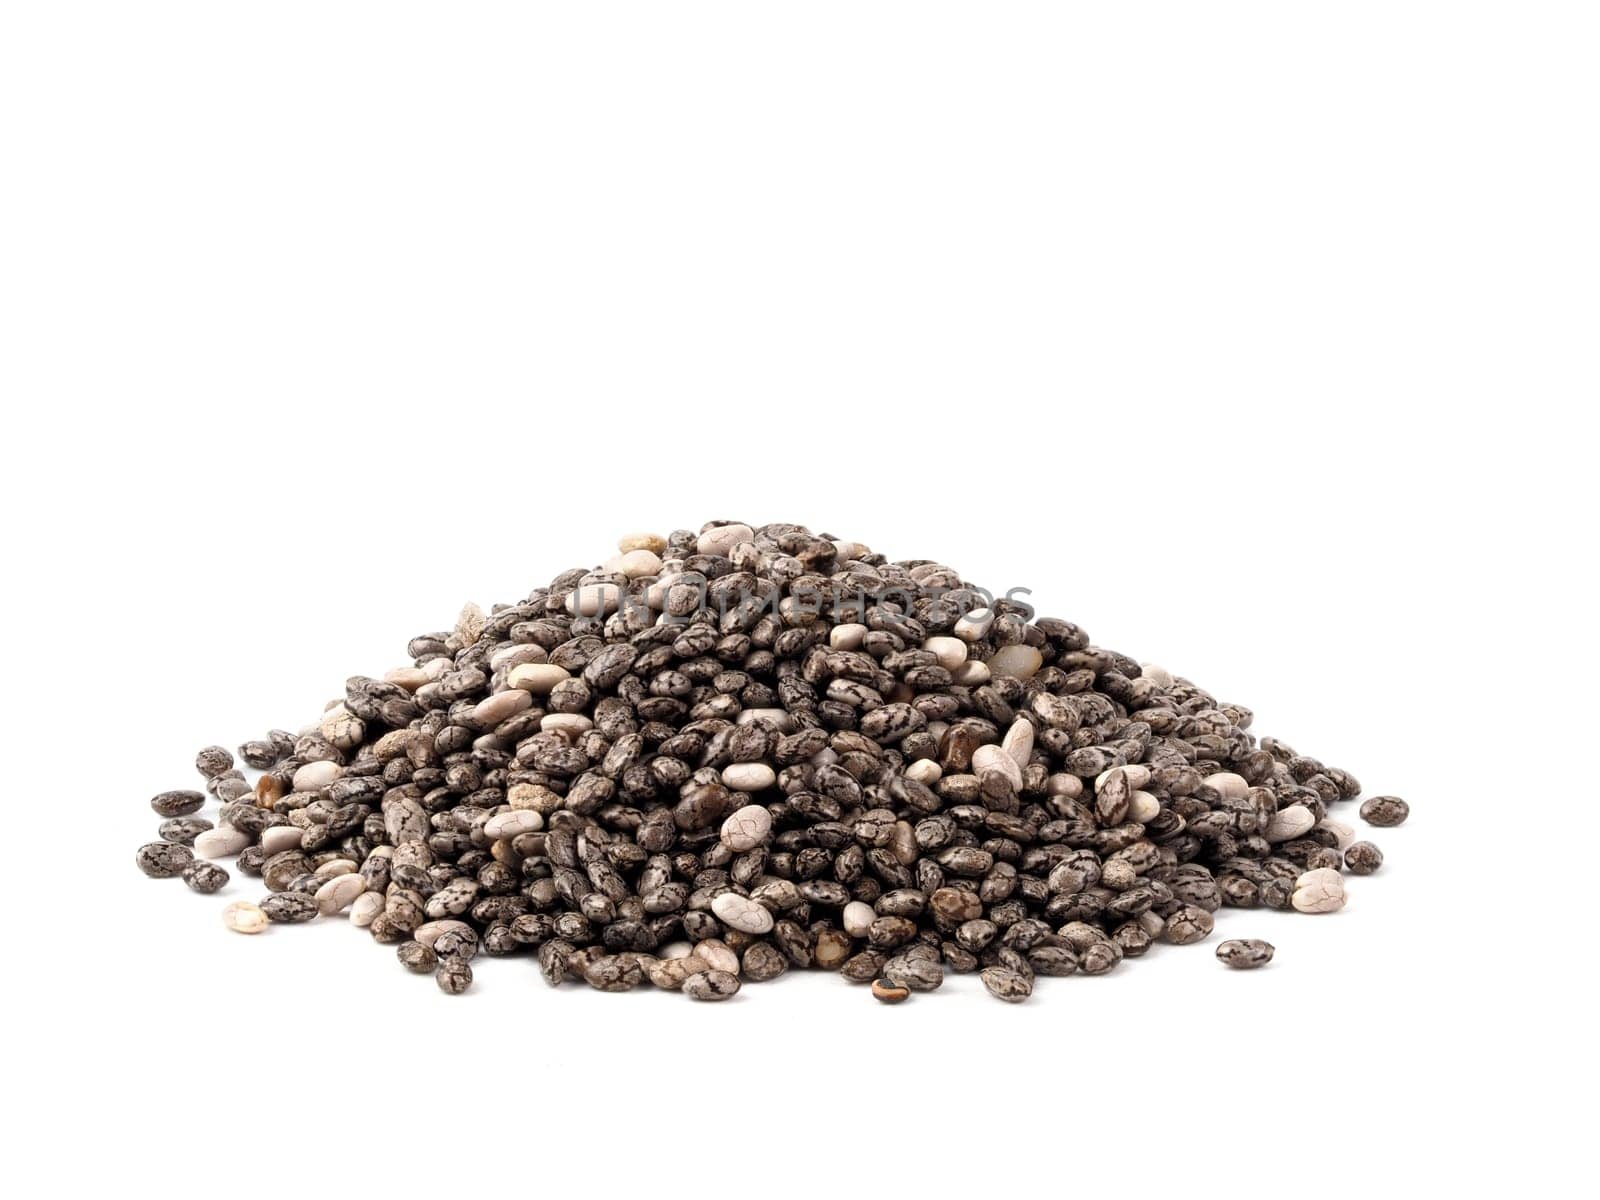 chia seeds on white background. Pile of healthy chia seeds Isolated on white with clipping path.